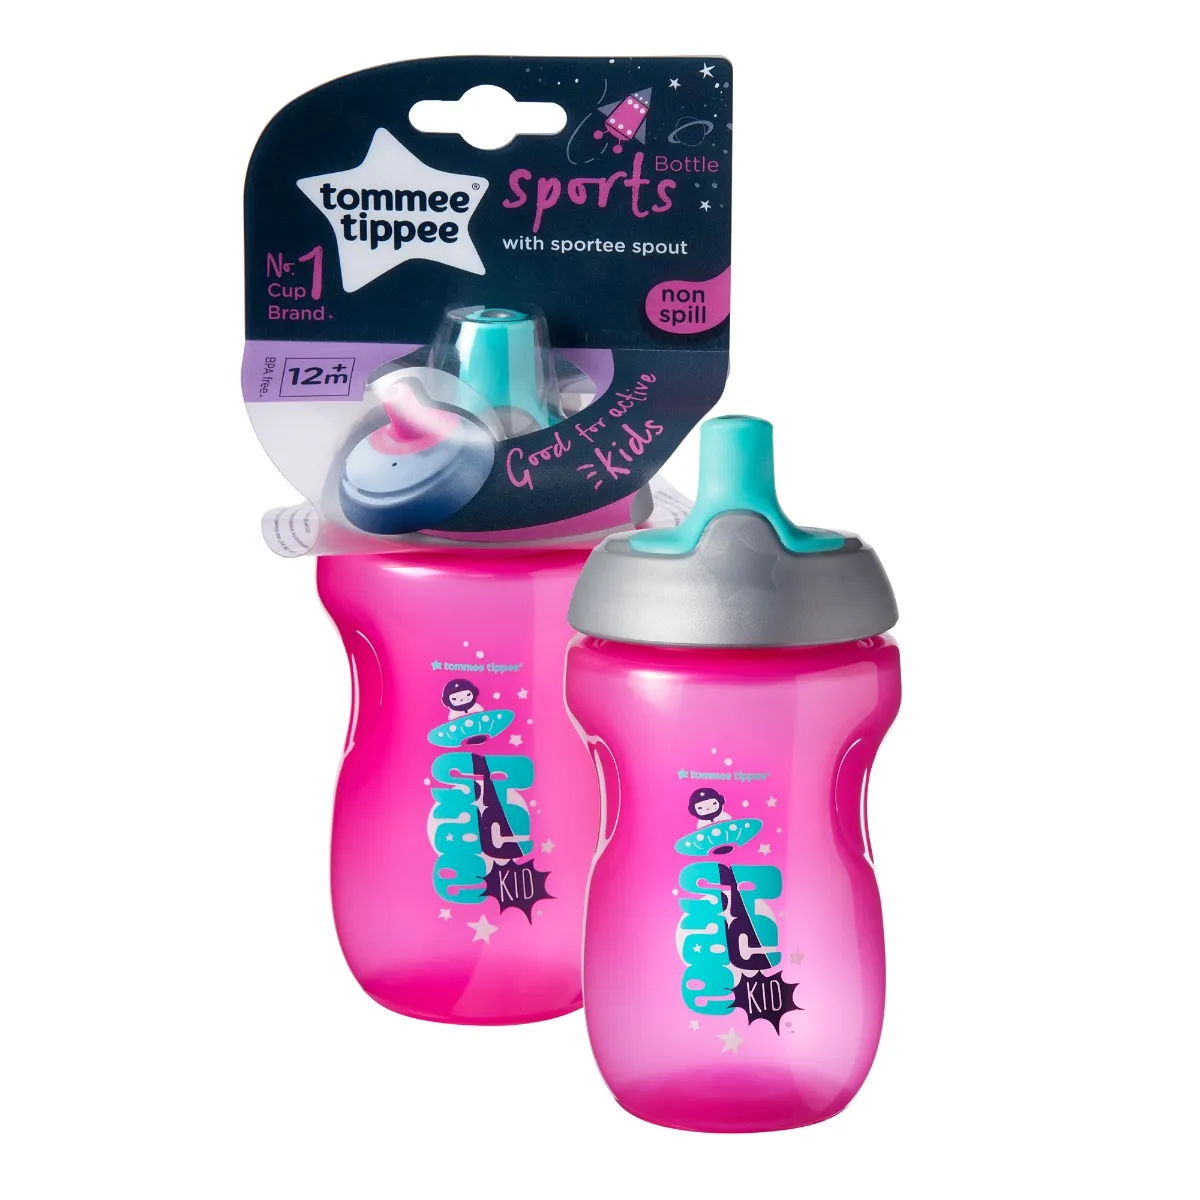 Cana sports ONL +12 luni Roz, 300ml, Tommee Tippee